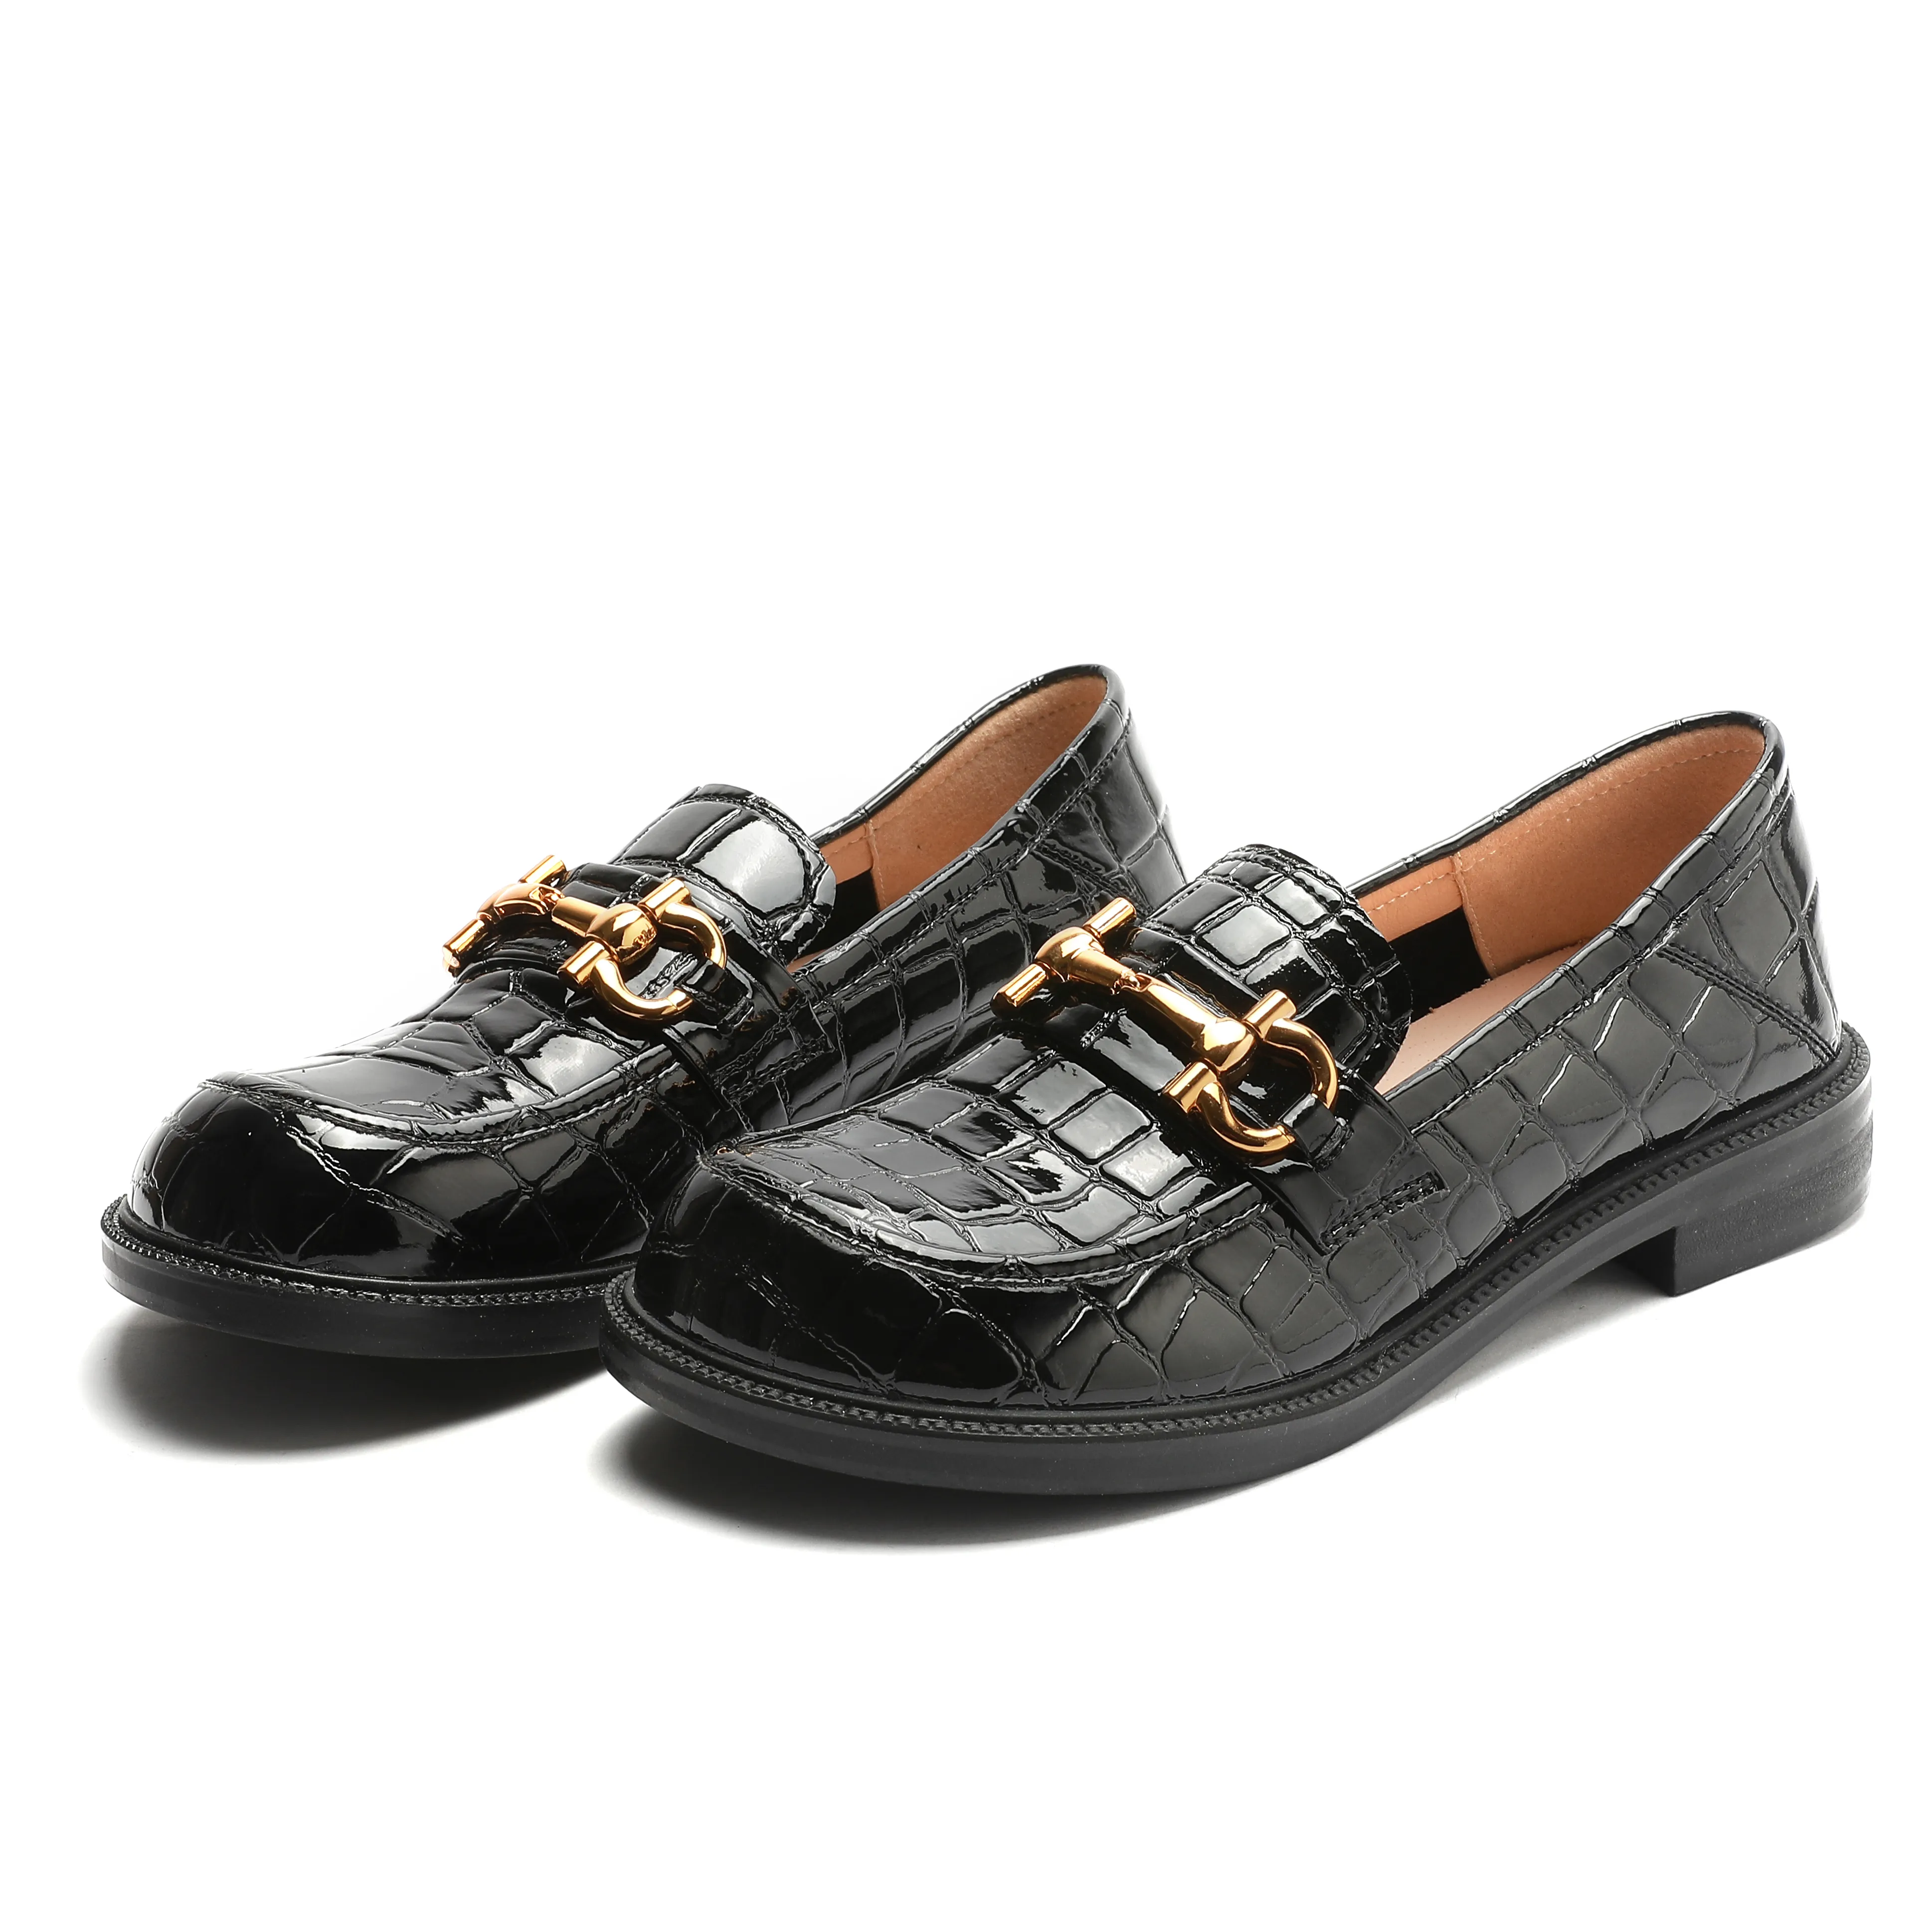 Wholesale Platform Casual Lady Footwear Driving Shoes Leather Flat Loafers Slip On Women Loafers Shoes